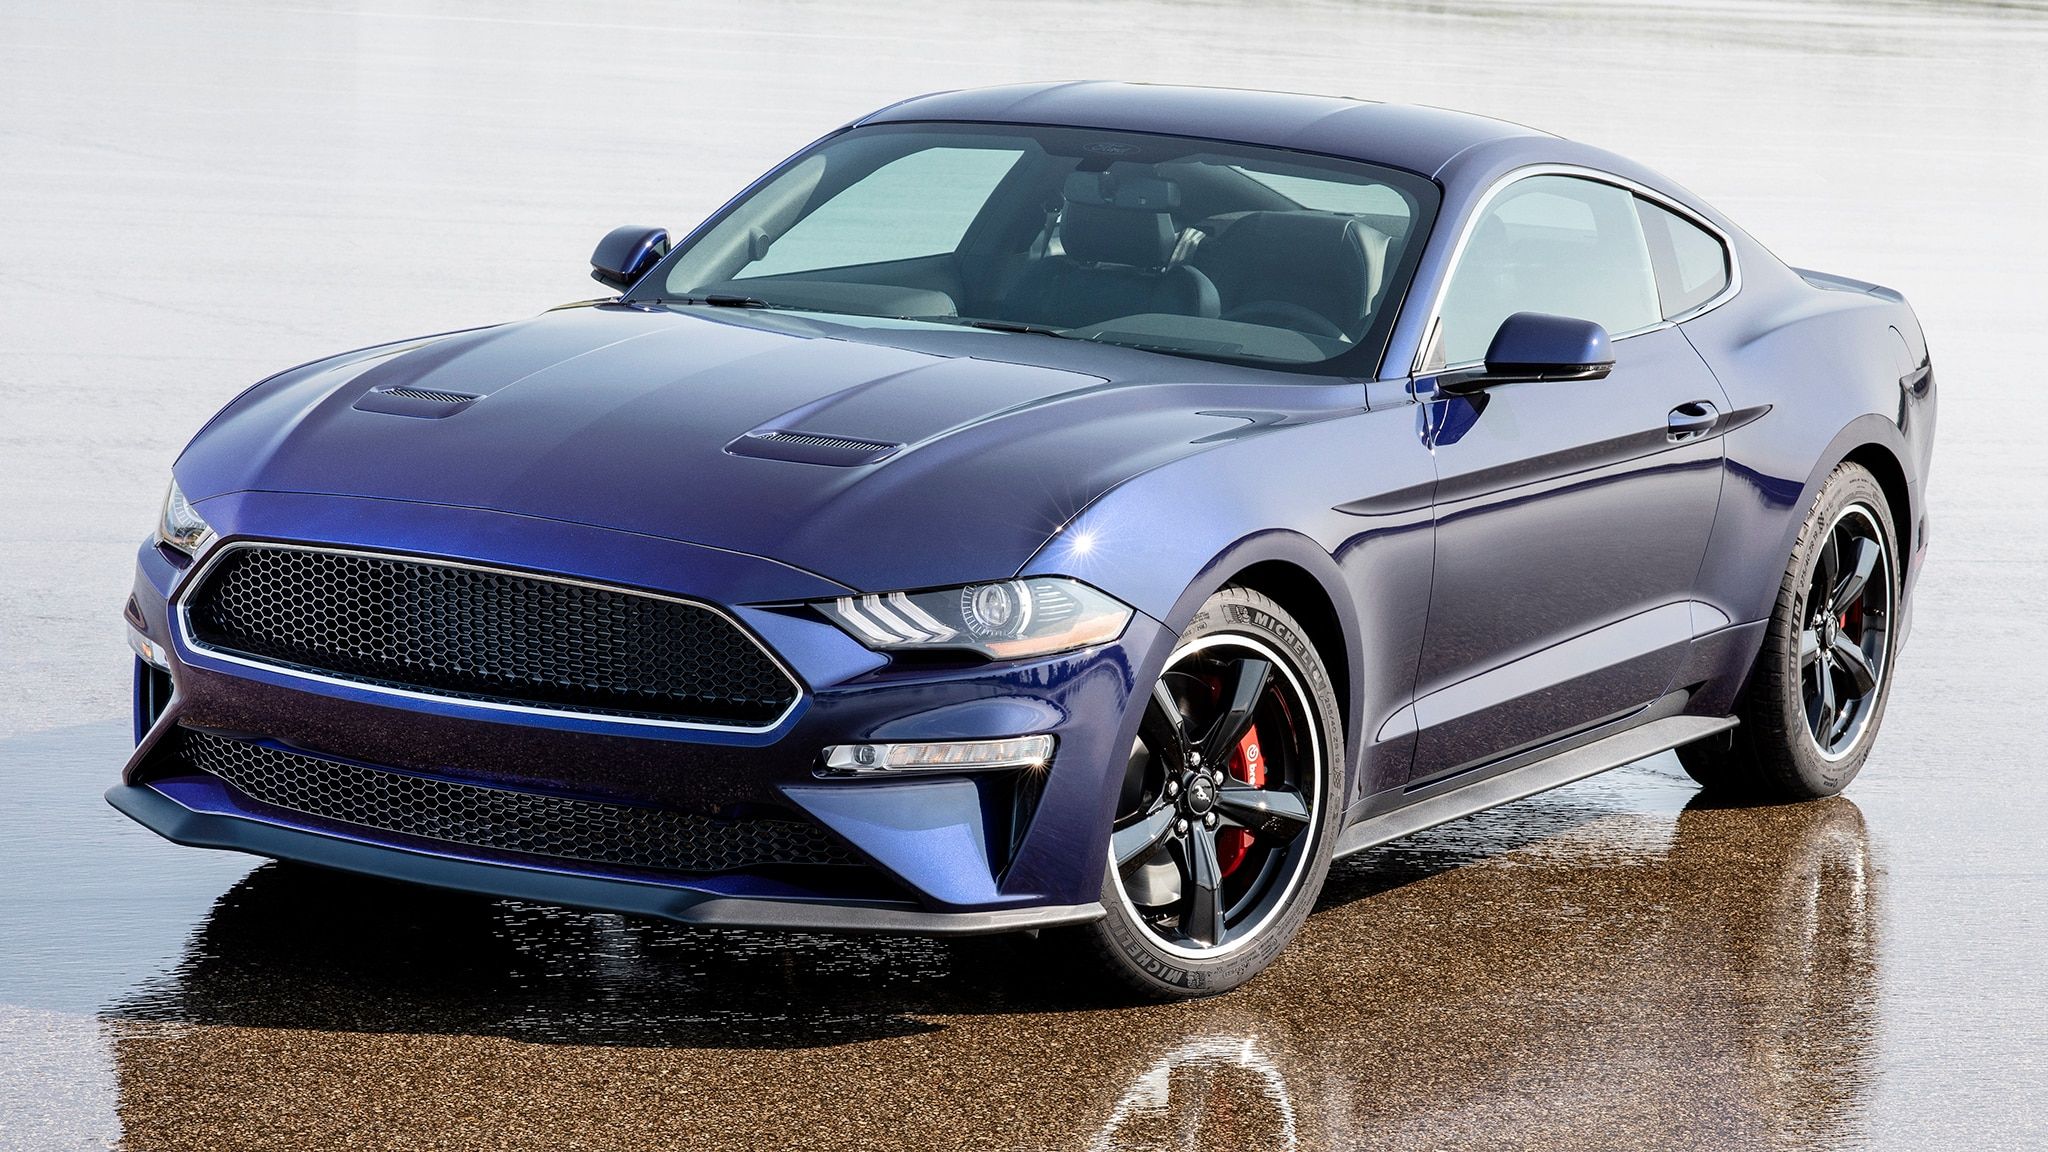 A 2021 Ford Mustang Mach 1? It's Happening, Just Don't Confuse It With Mach E